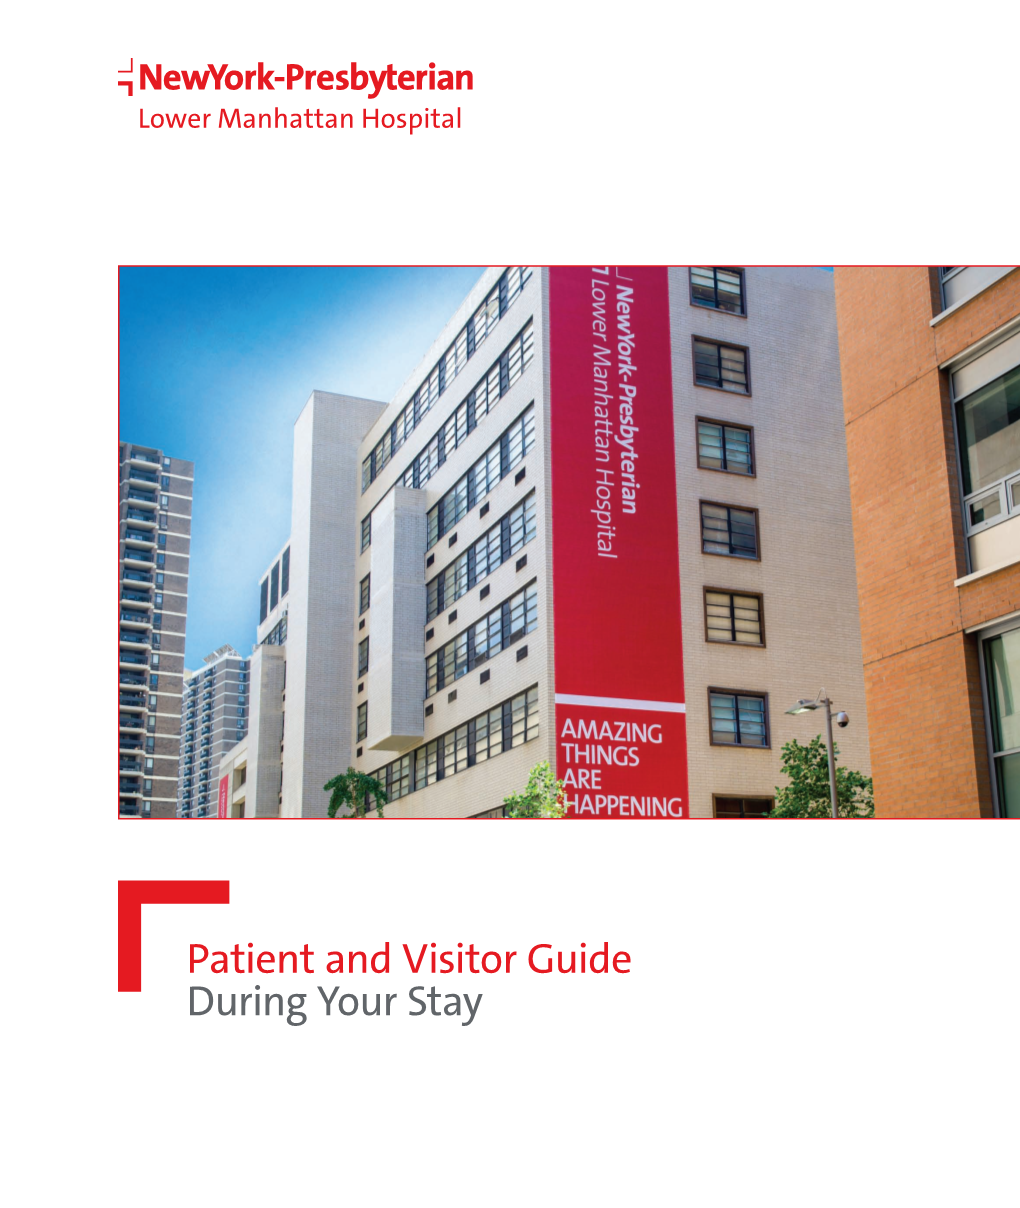 Patient and Visitor Guide During Your Stay